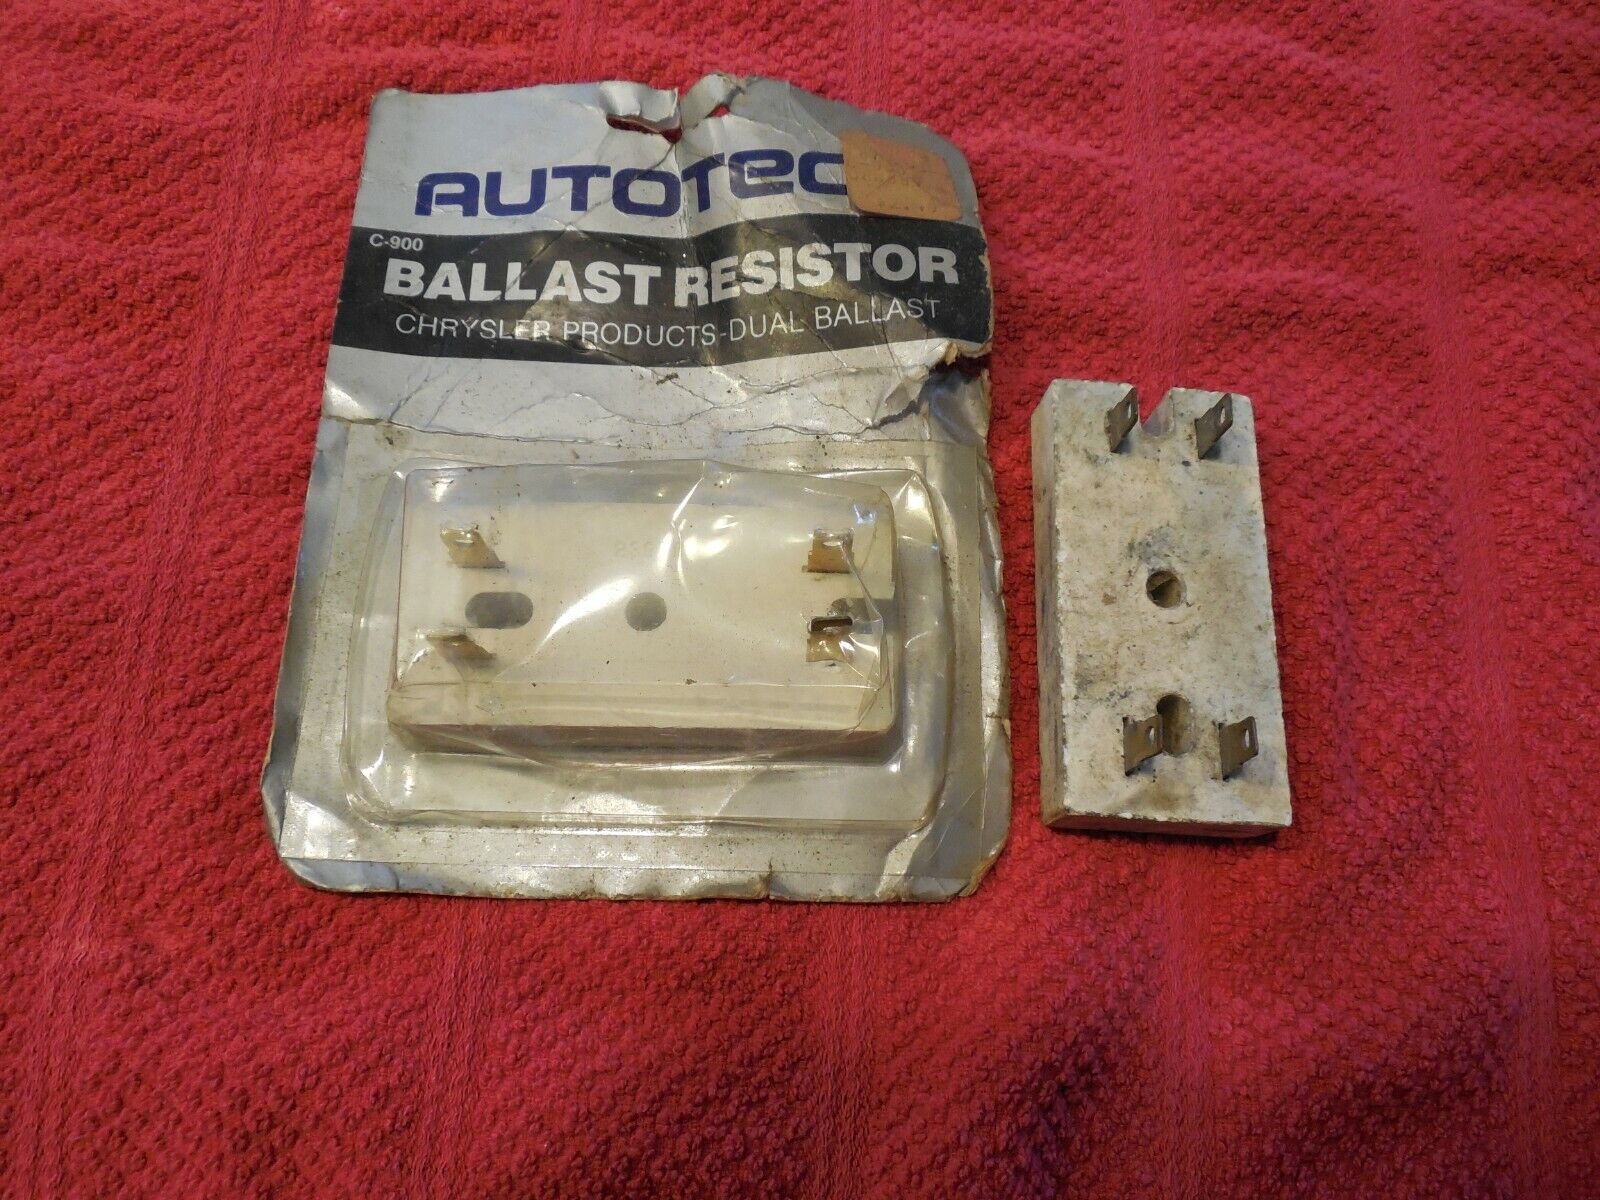 CHRYSLER BALLAST RESISTOR..1 NEW OLD STOCK 1 USED UNTESTED